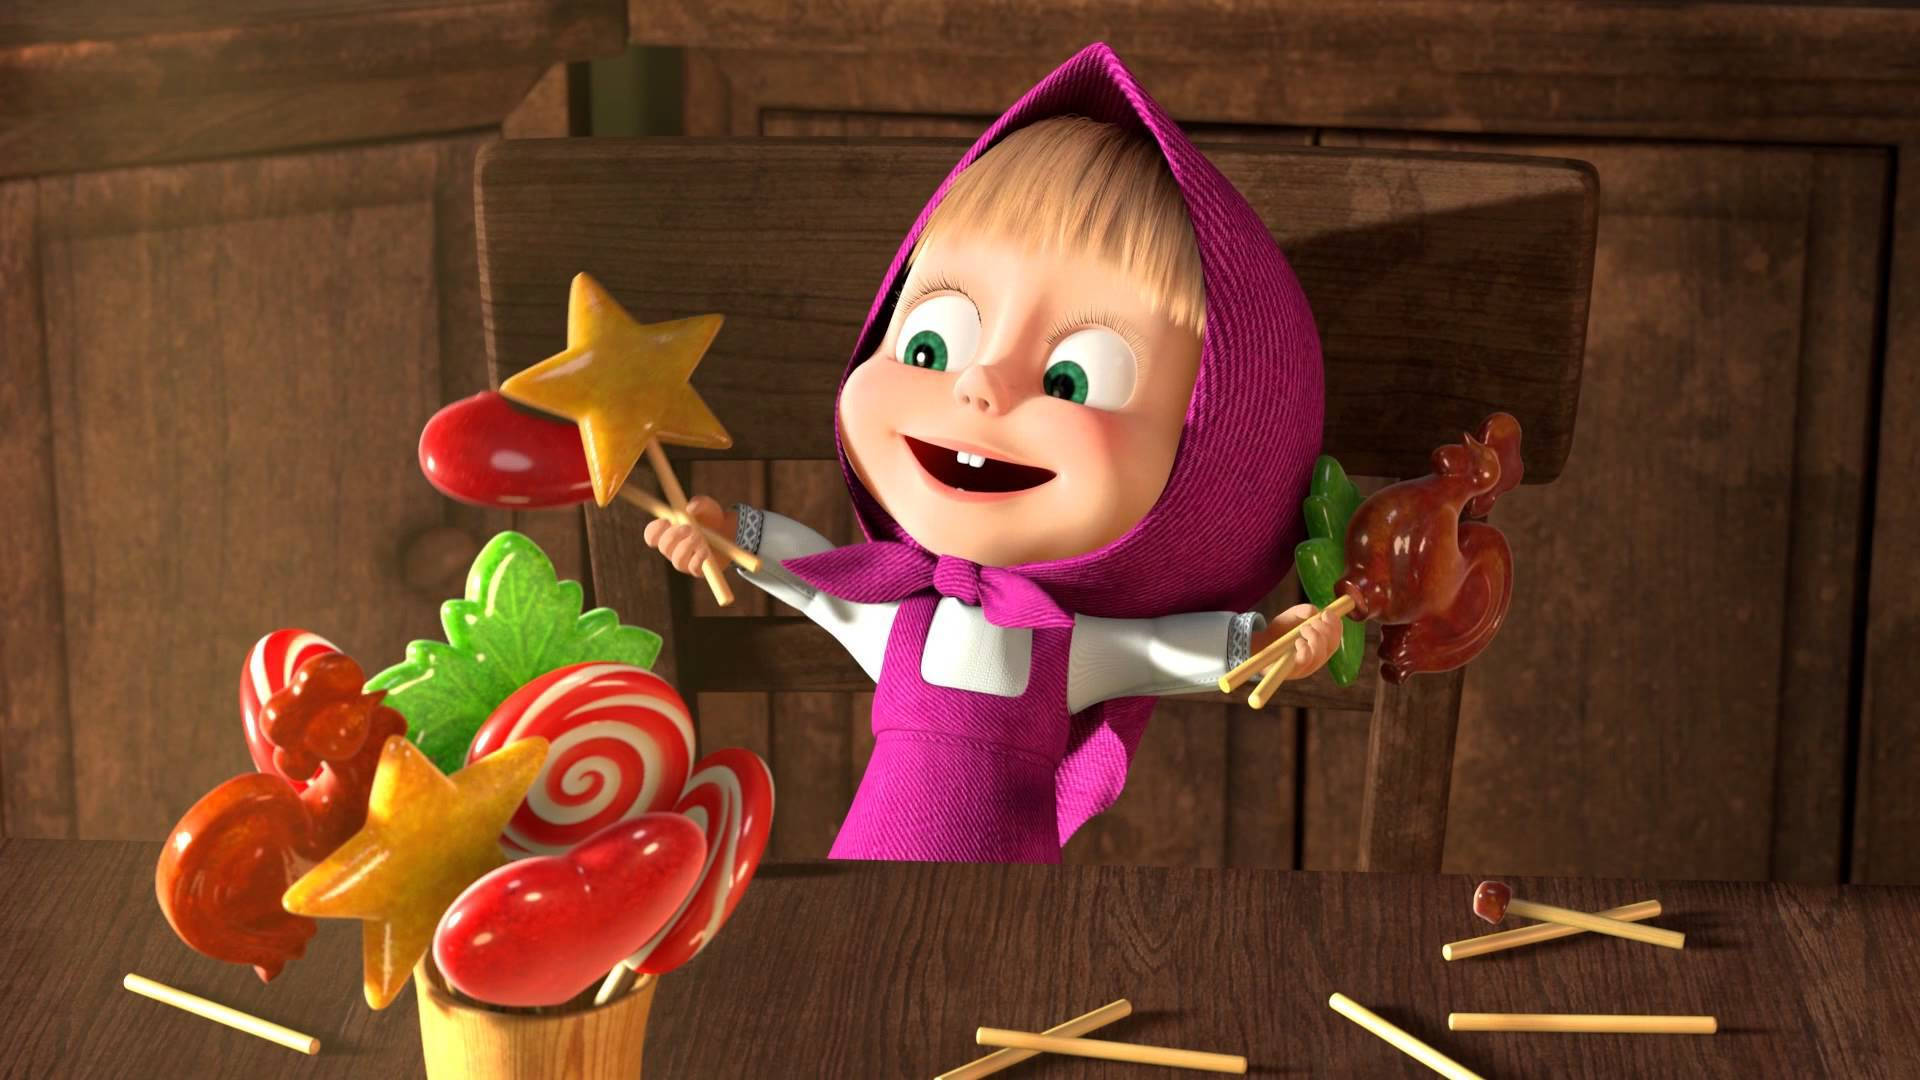 Masha And The Bear With Candies Wallpaper